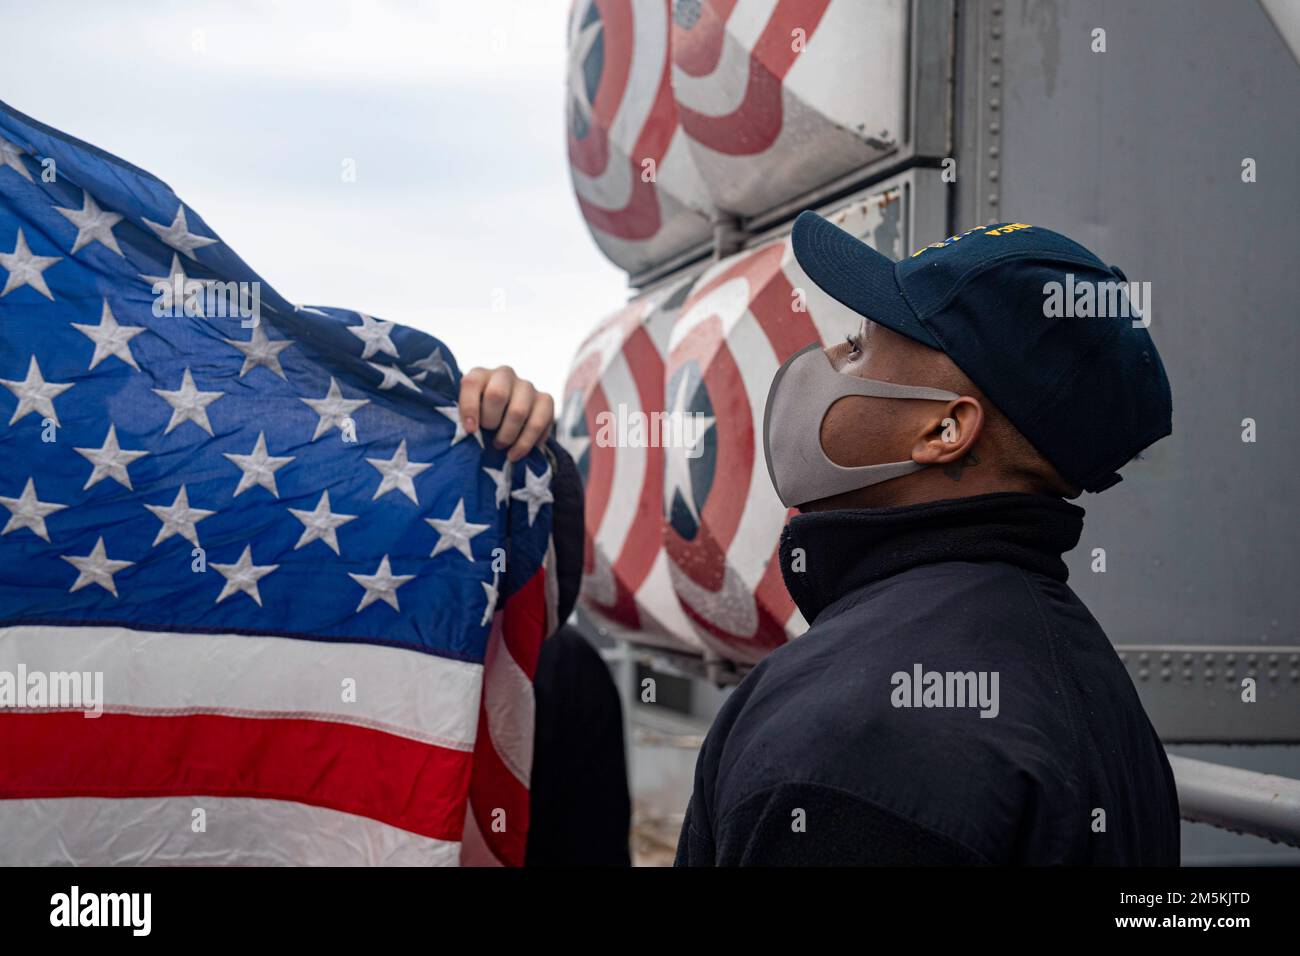 SASEBO, Japan (March 22, 2022) Aviation Boatswain’s Mate (Handling) Airman Camron Lamarre, from Brooklyn, N.Y., assigned to the forward-deployed amphibious assault ship USS America (LHA 6), watches as the American flag is prepared for colors. America, lead ship of the America Amphibious Ready Group, is operating in the U.S. 7th Fleet area of responsibility to enhance interoperability with allies and partners and serve as a ready response force to defend peace and stability in the Indo-Pacific region. Stock Photo